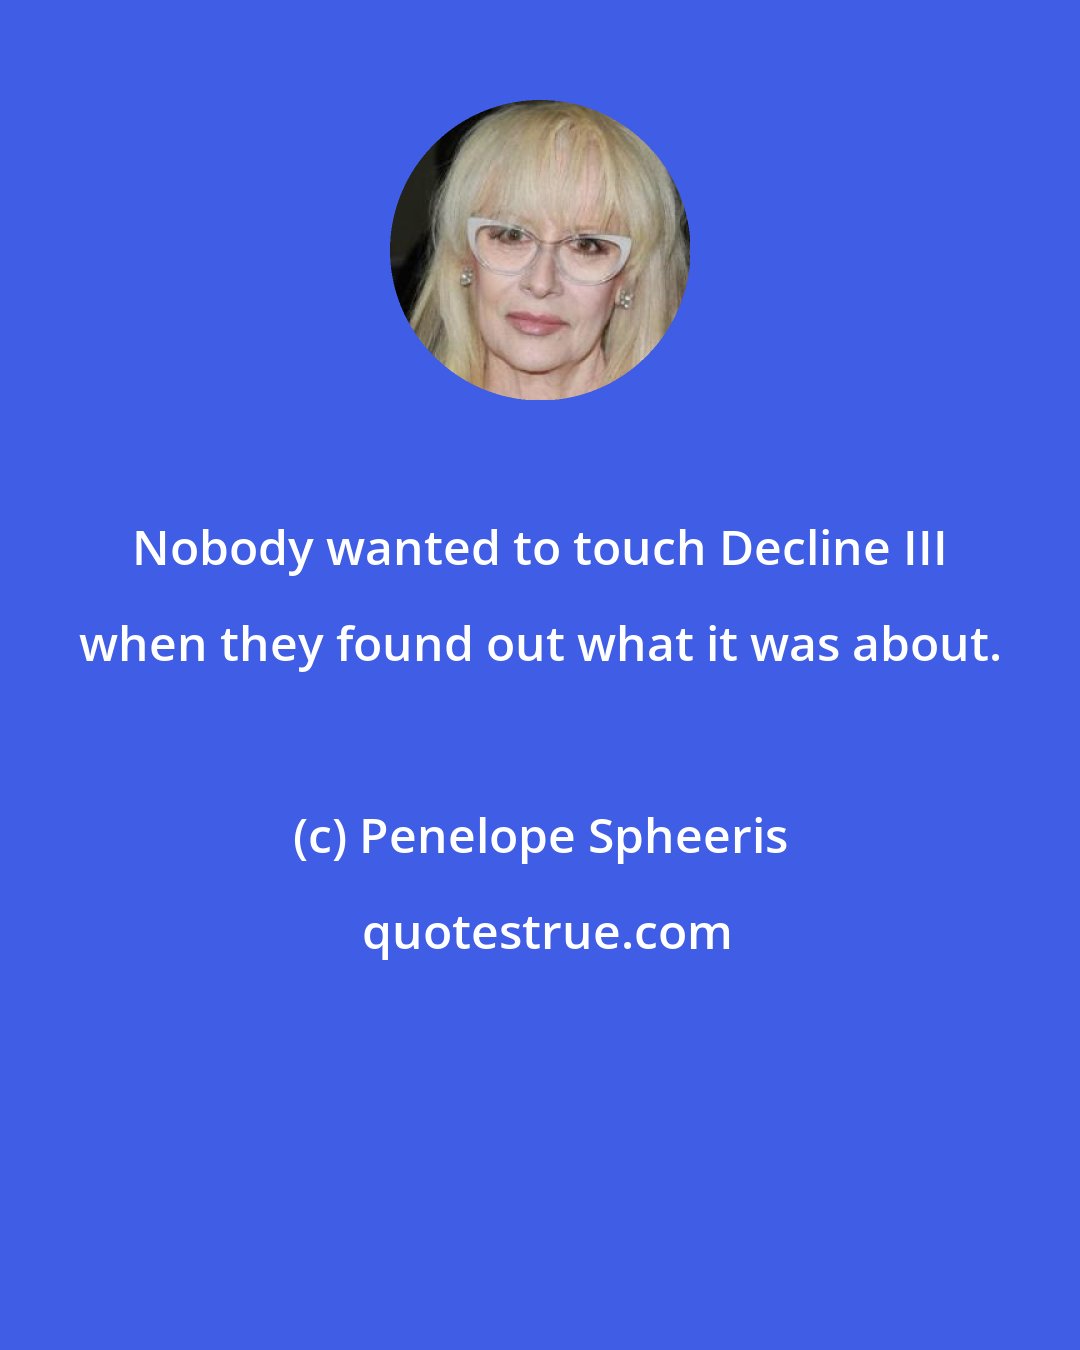 Penelope Spheeris: Nobody wanted to touch Decline III when they found out what it was about.